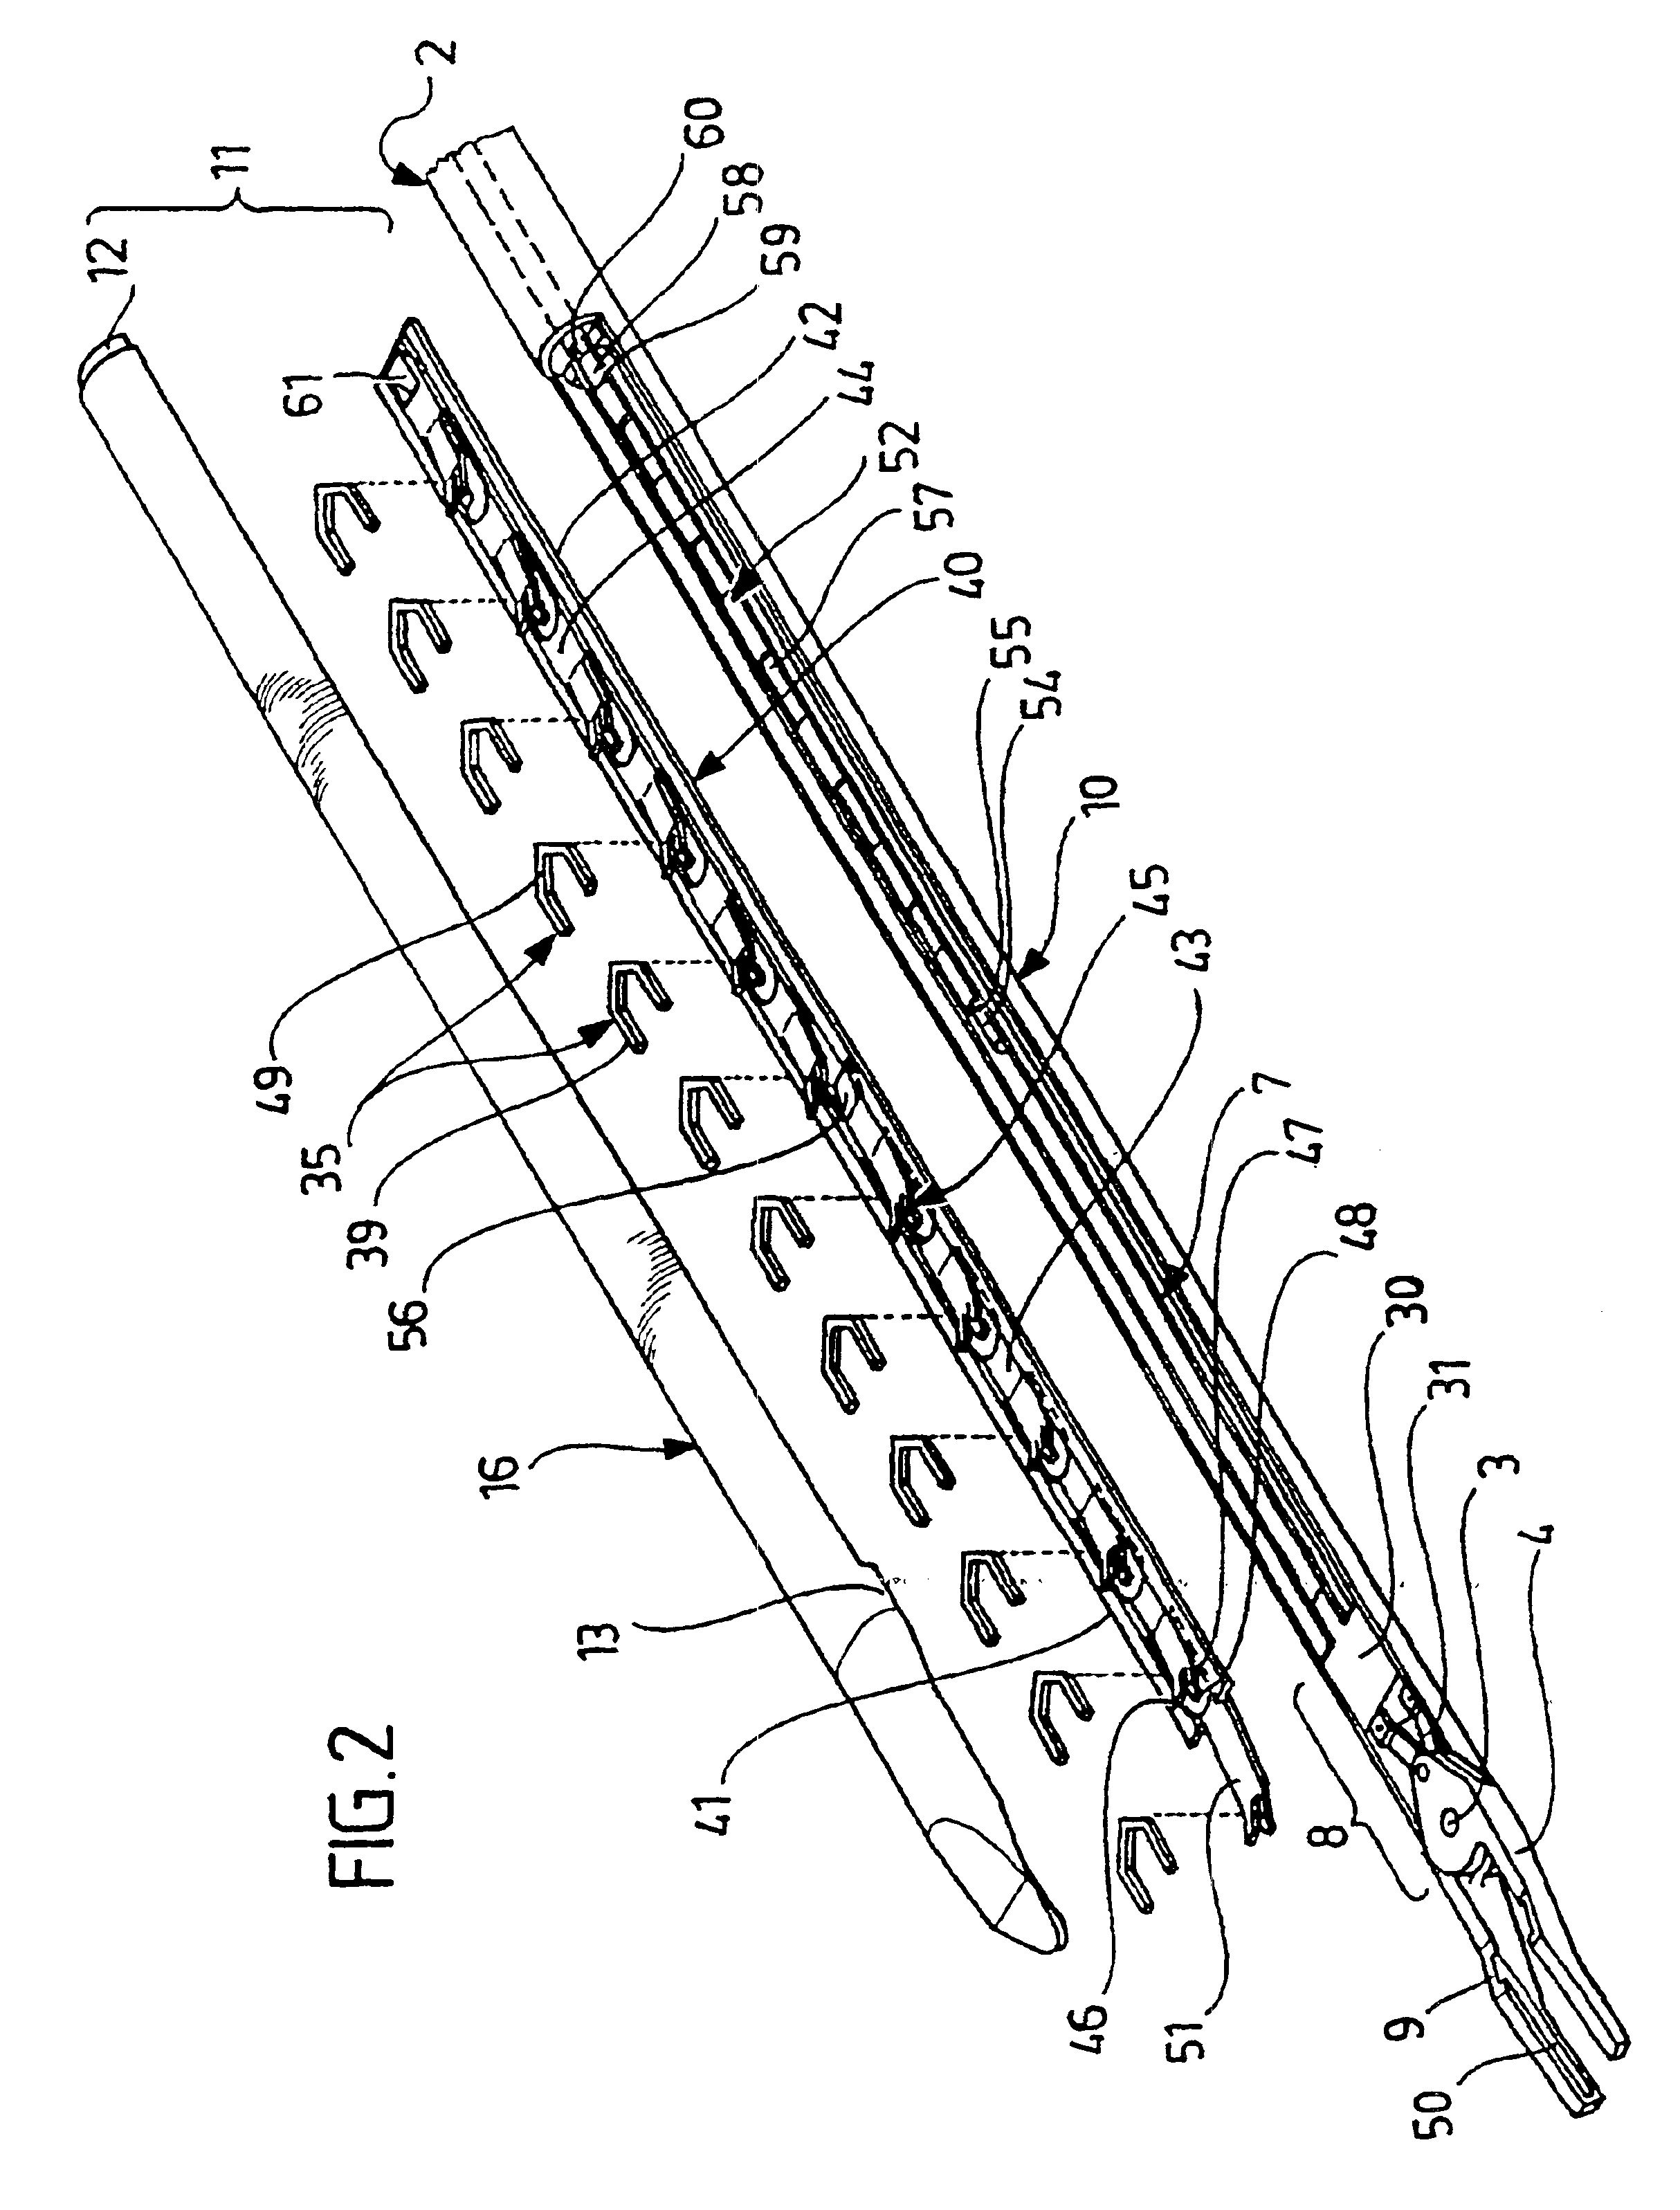 Instrument for placing surgical clips